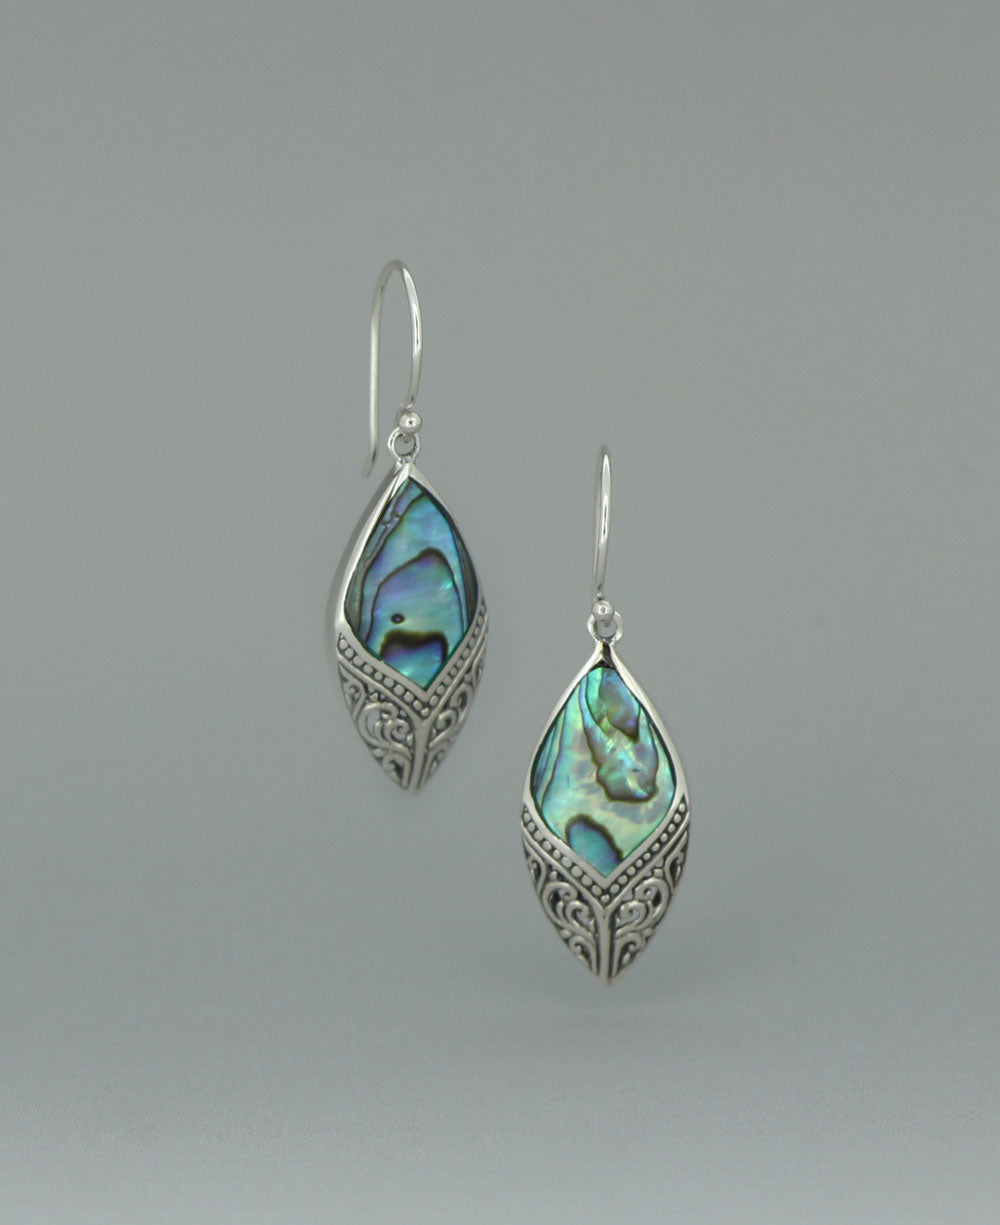 Front View Close-up image of the sterling silver Abalone Shell earrings